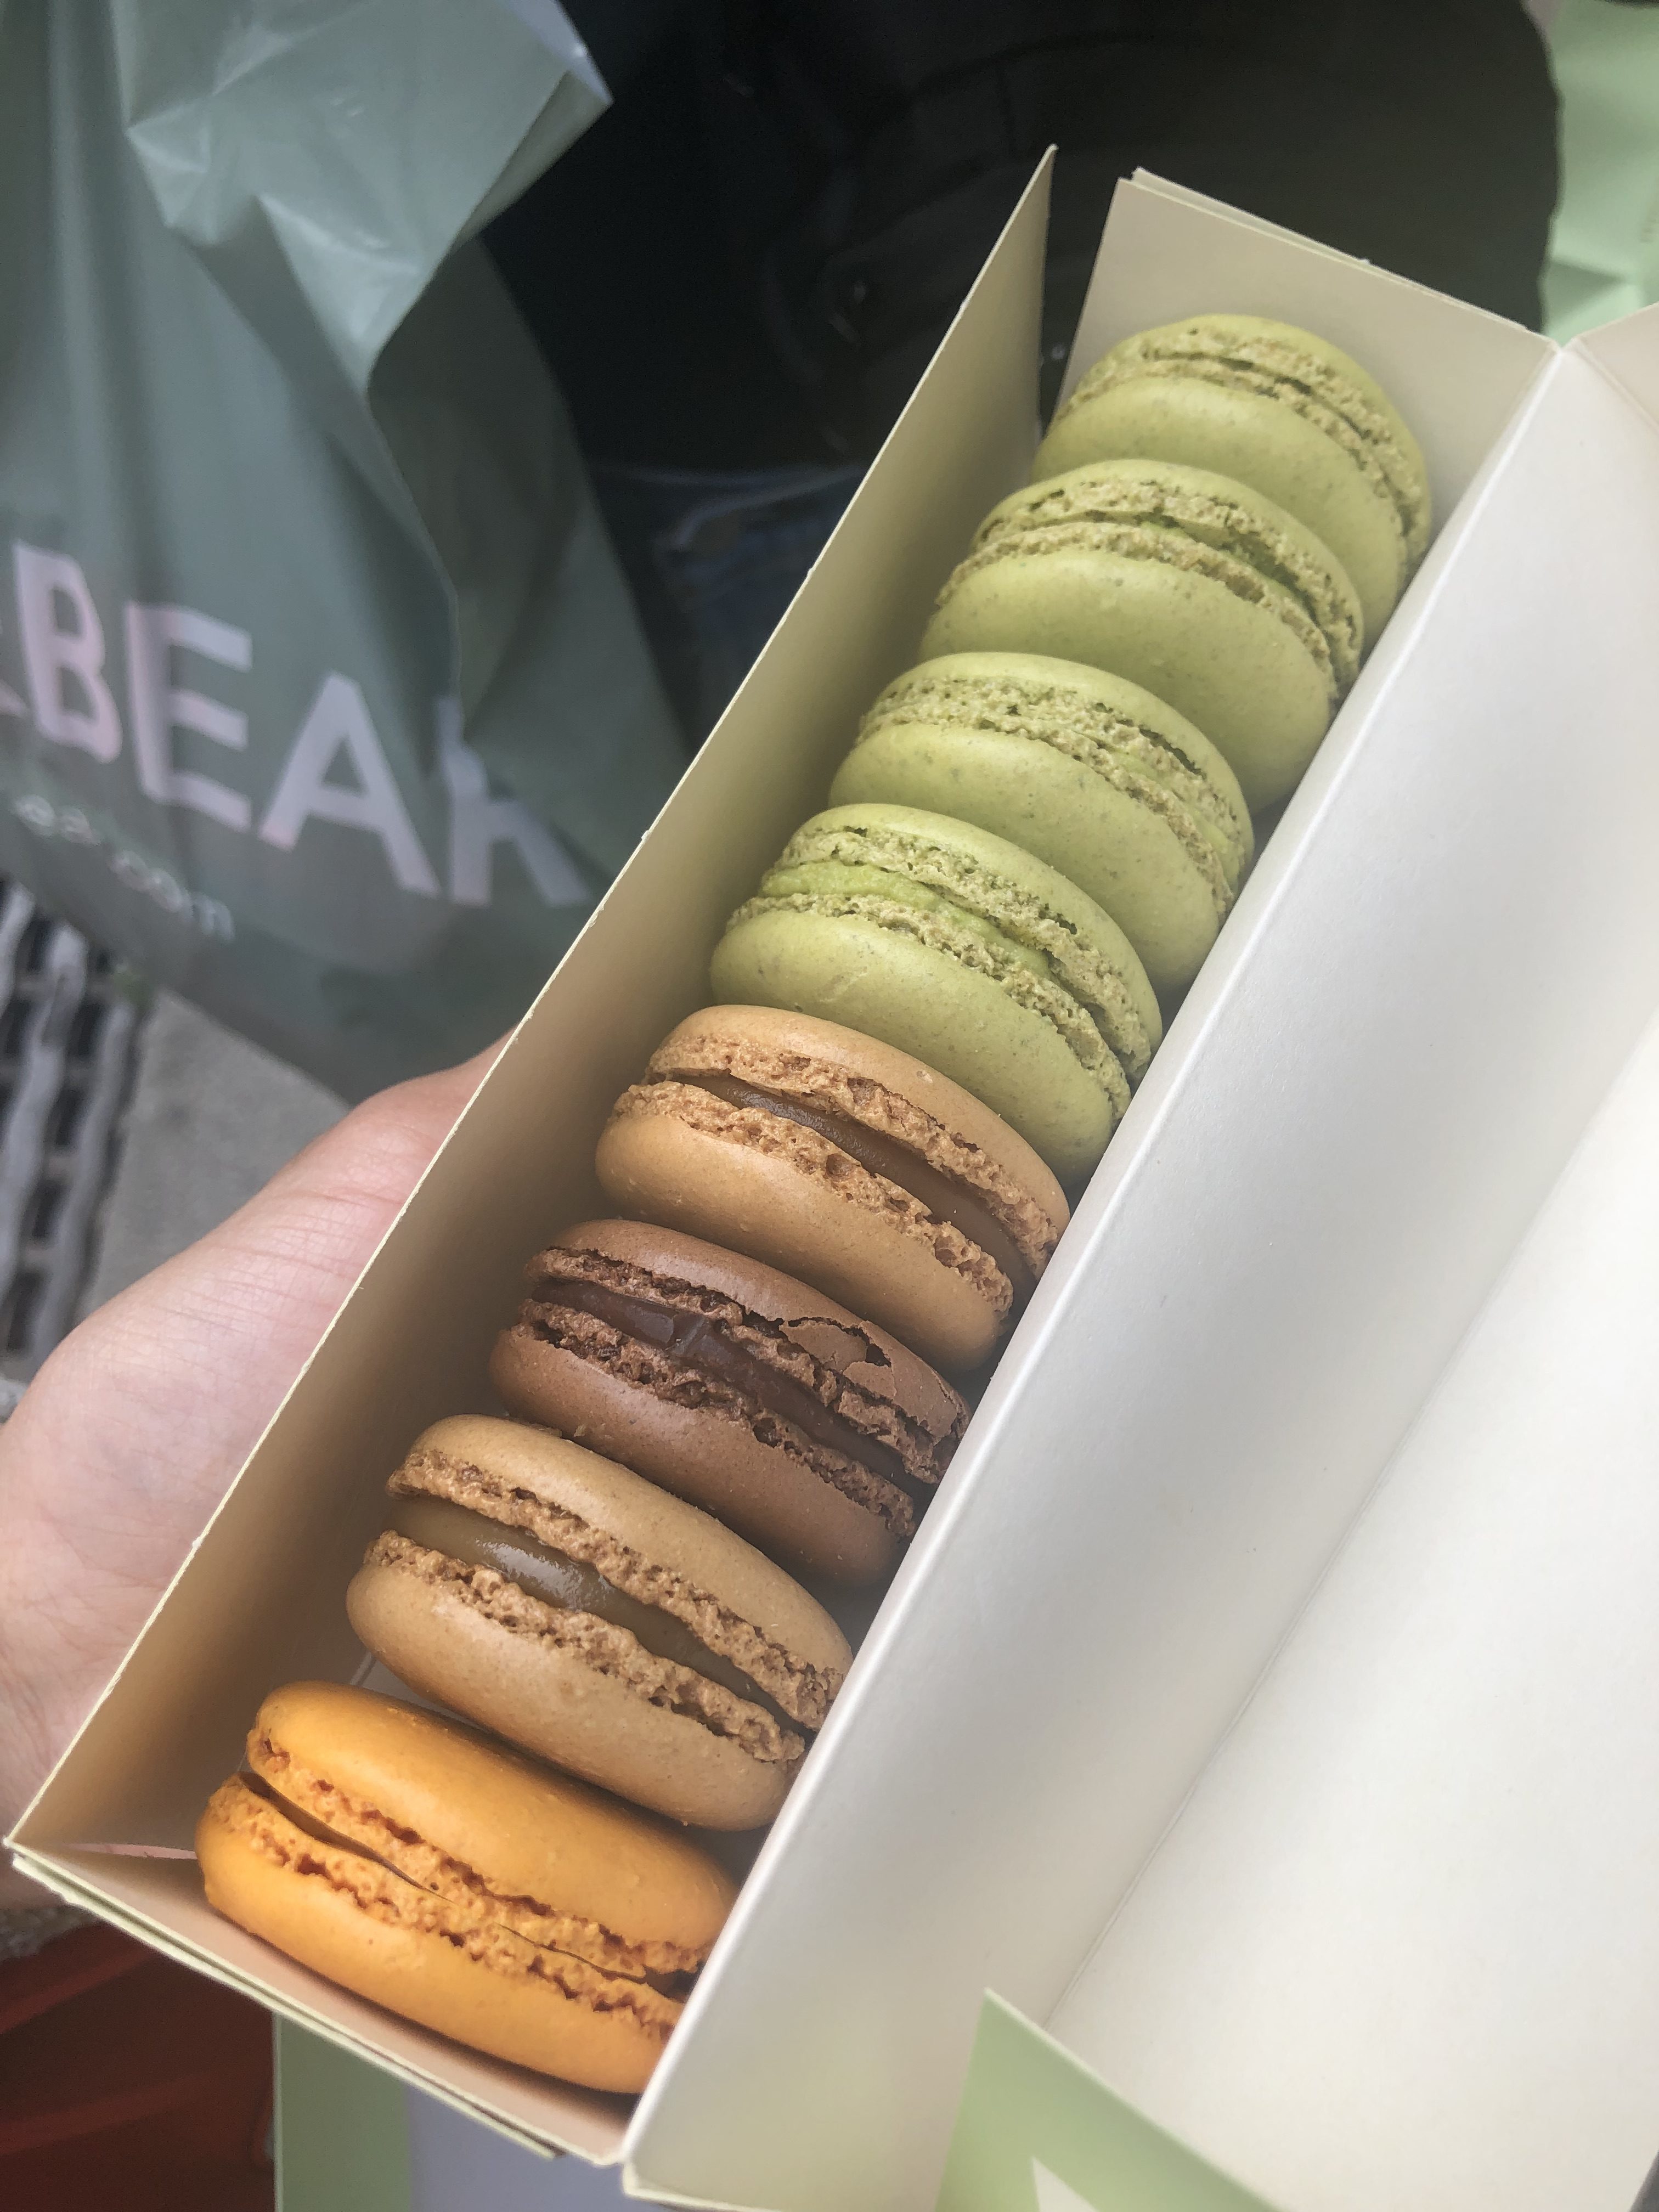 A set of eight colorful macarons from Laduree sits neatly in a box.